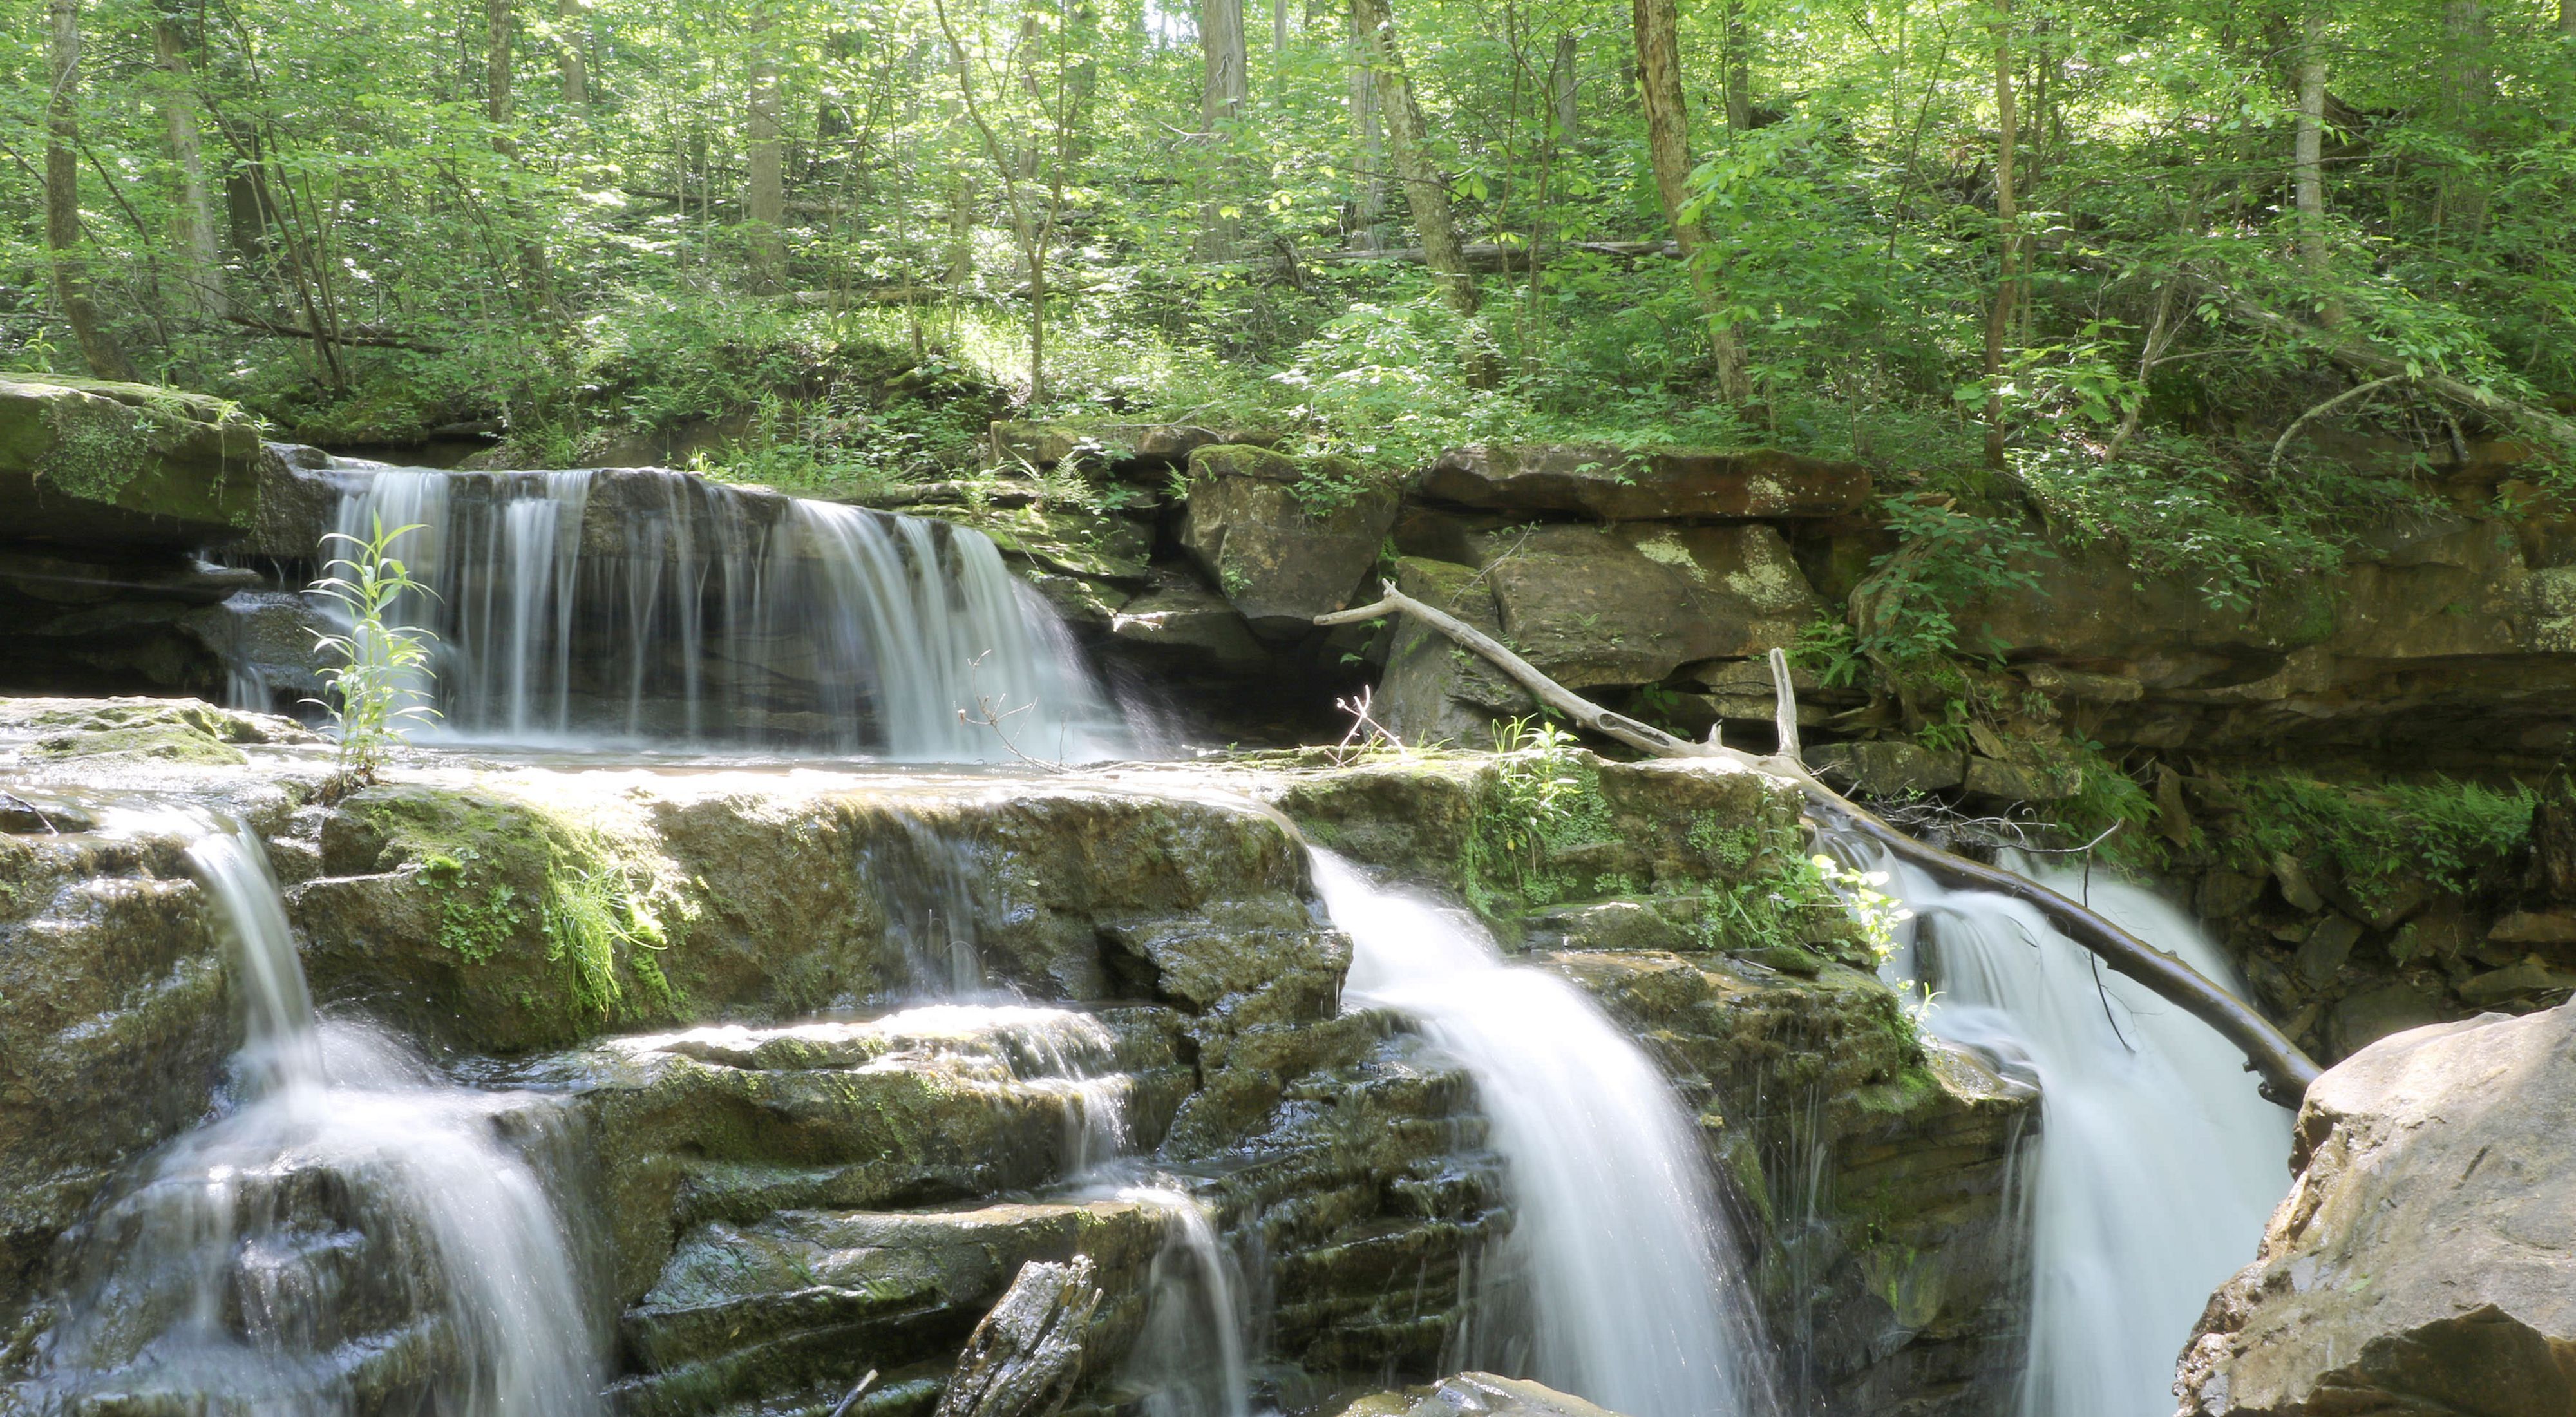 Water cascades over large rocks down a waterfall surrounded by forest dappled with sunlight.